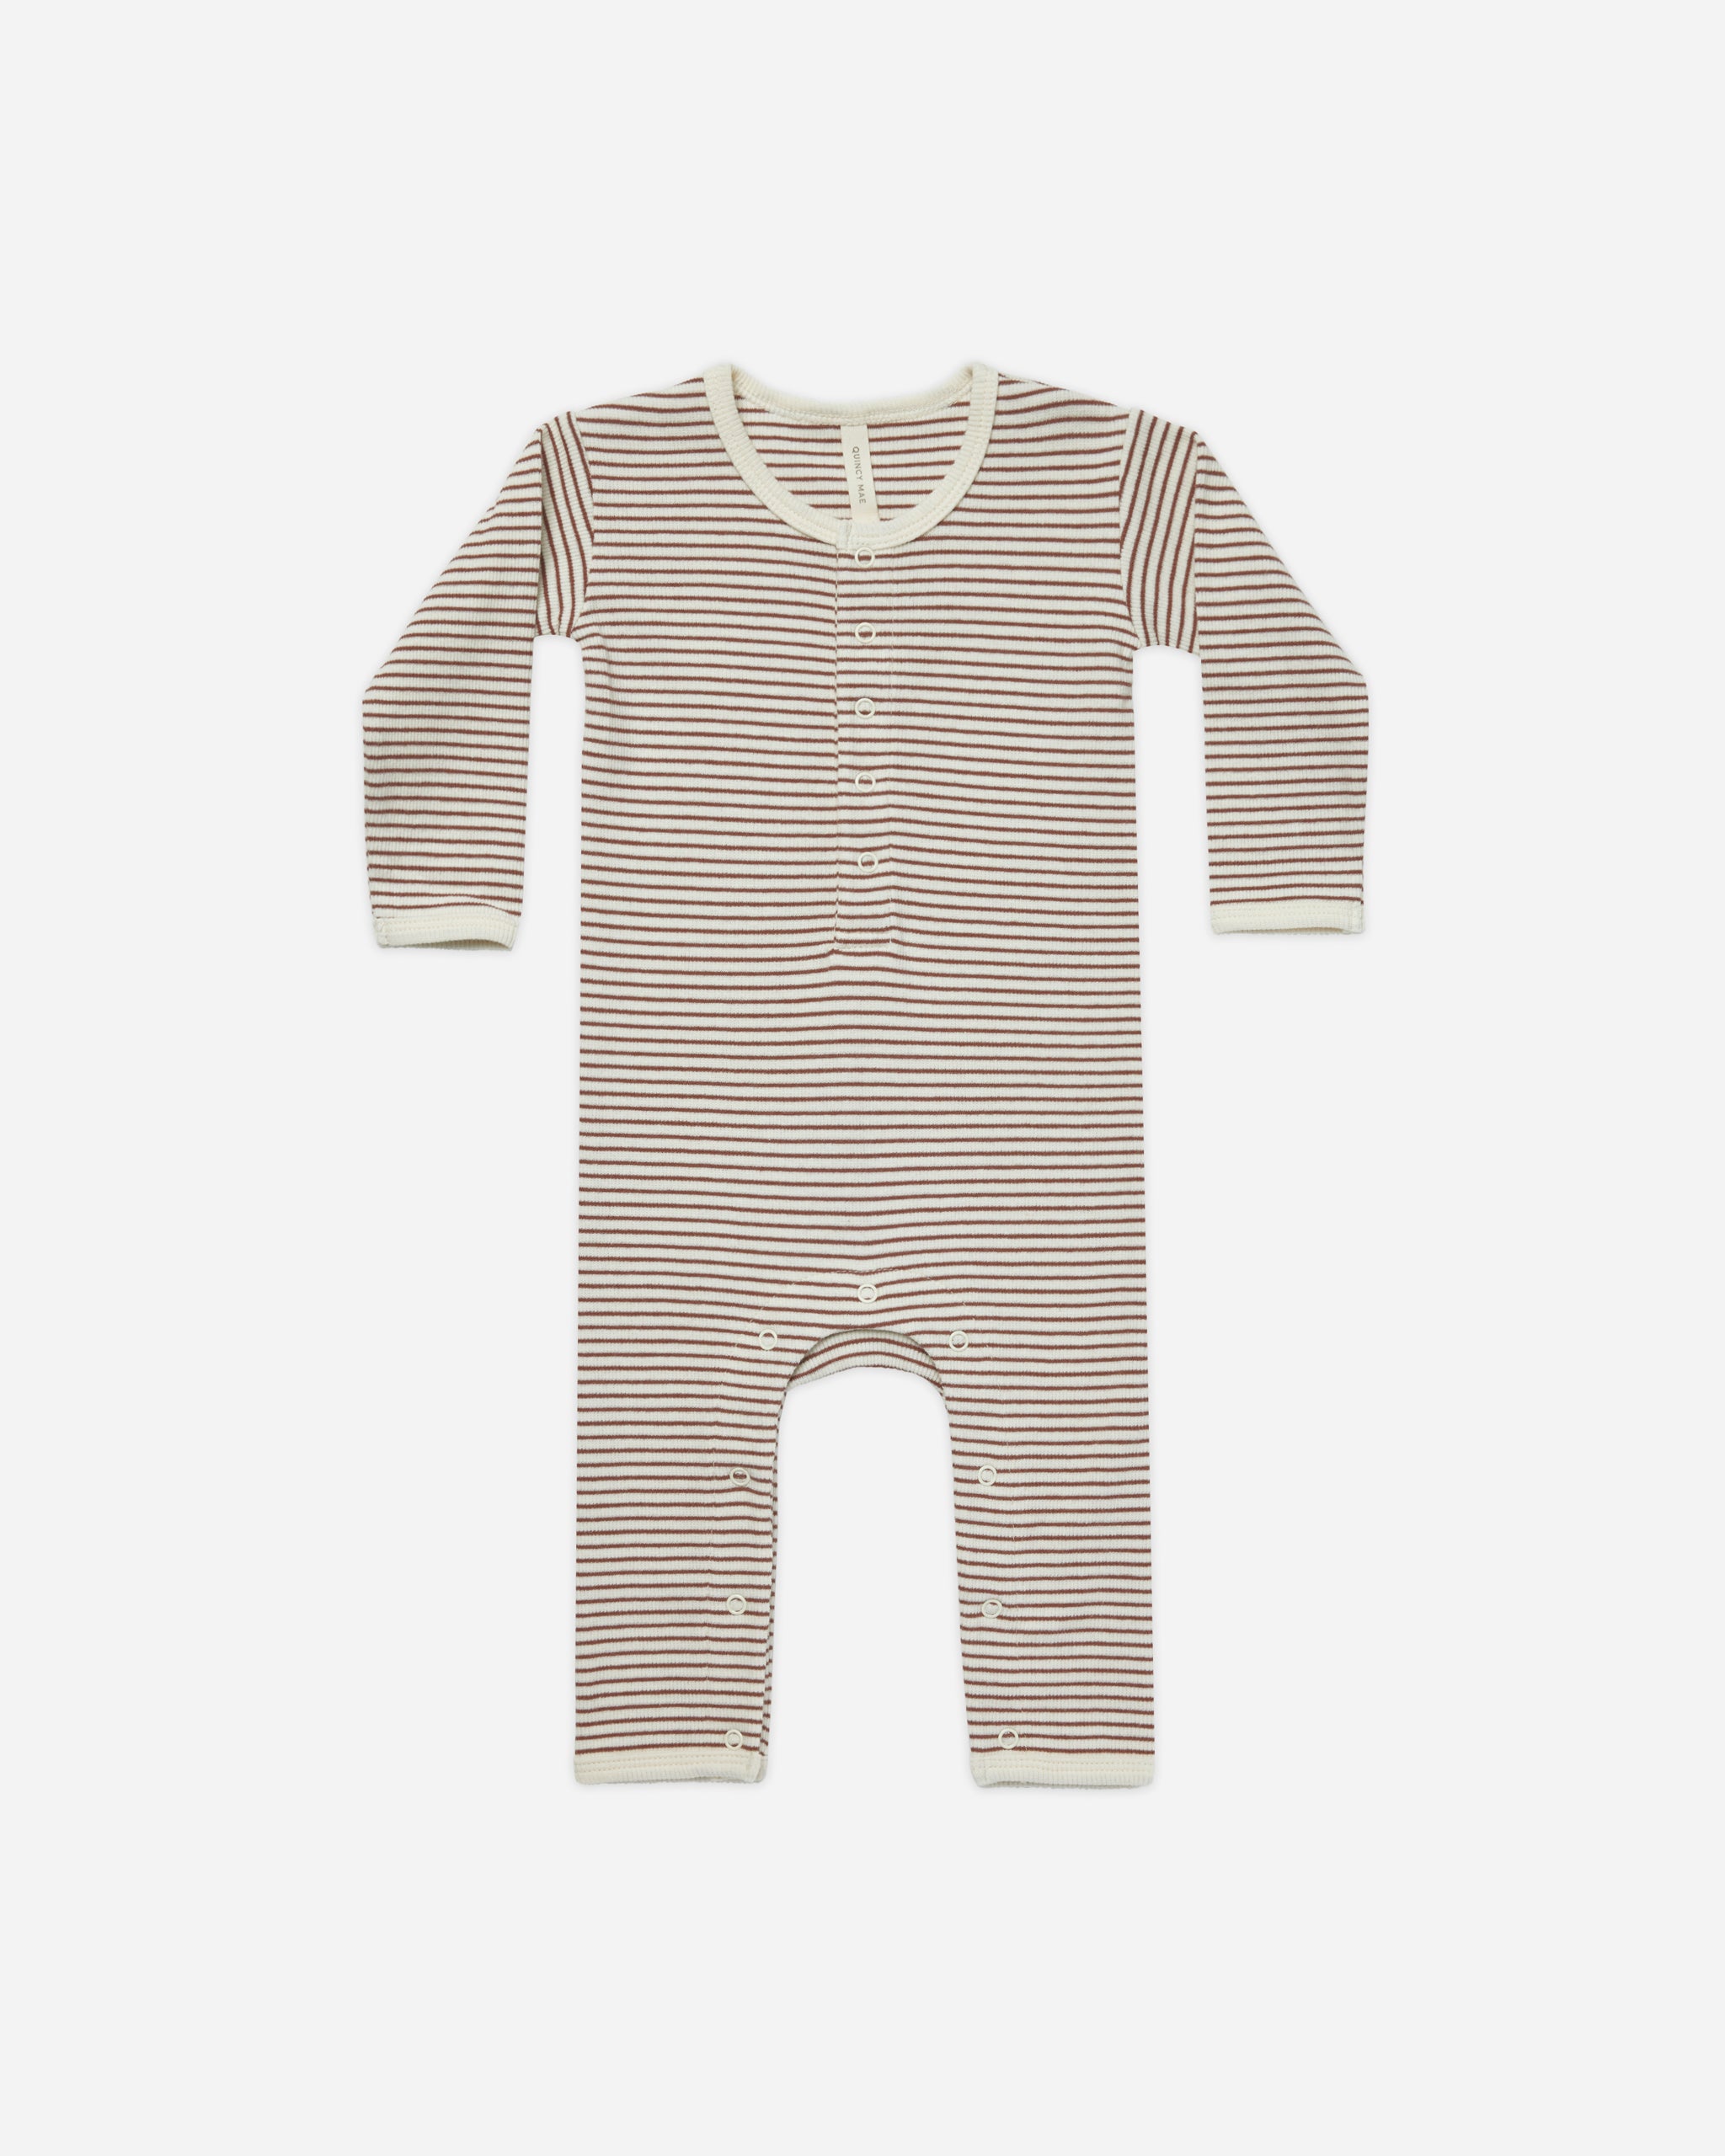 Ribbed Baby Jumpsuit || Plum Stripe - Rylee + Cru | Kids Clothes | Trendy Baby Clothes | Modern Infant Outfits |